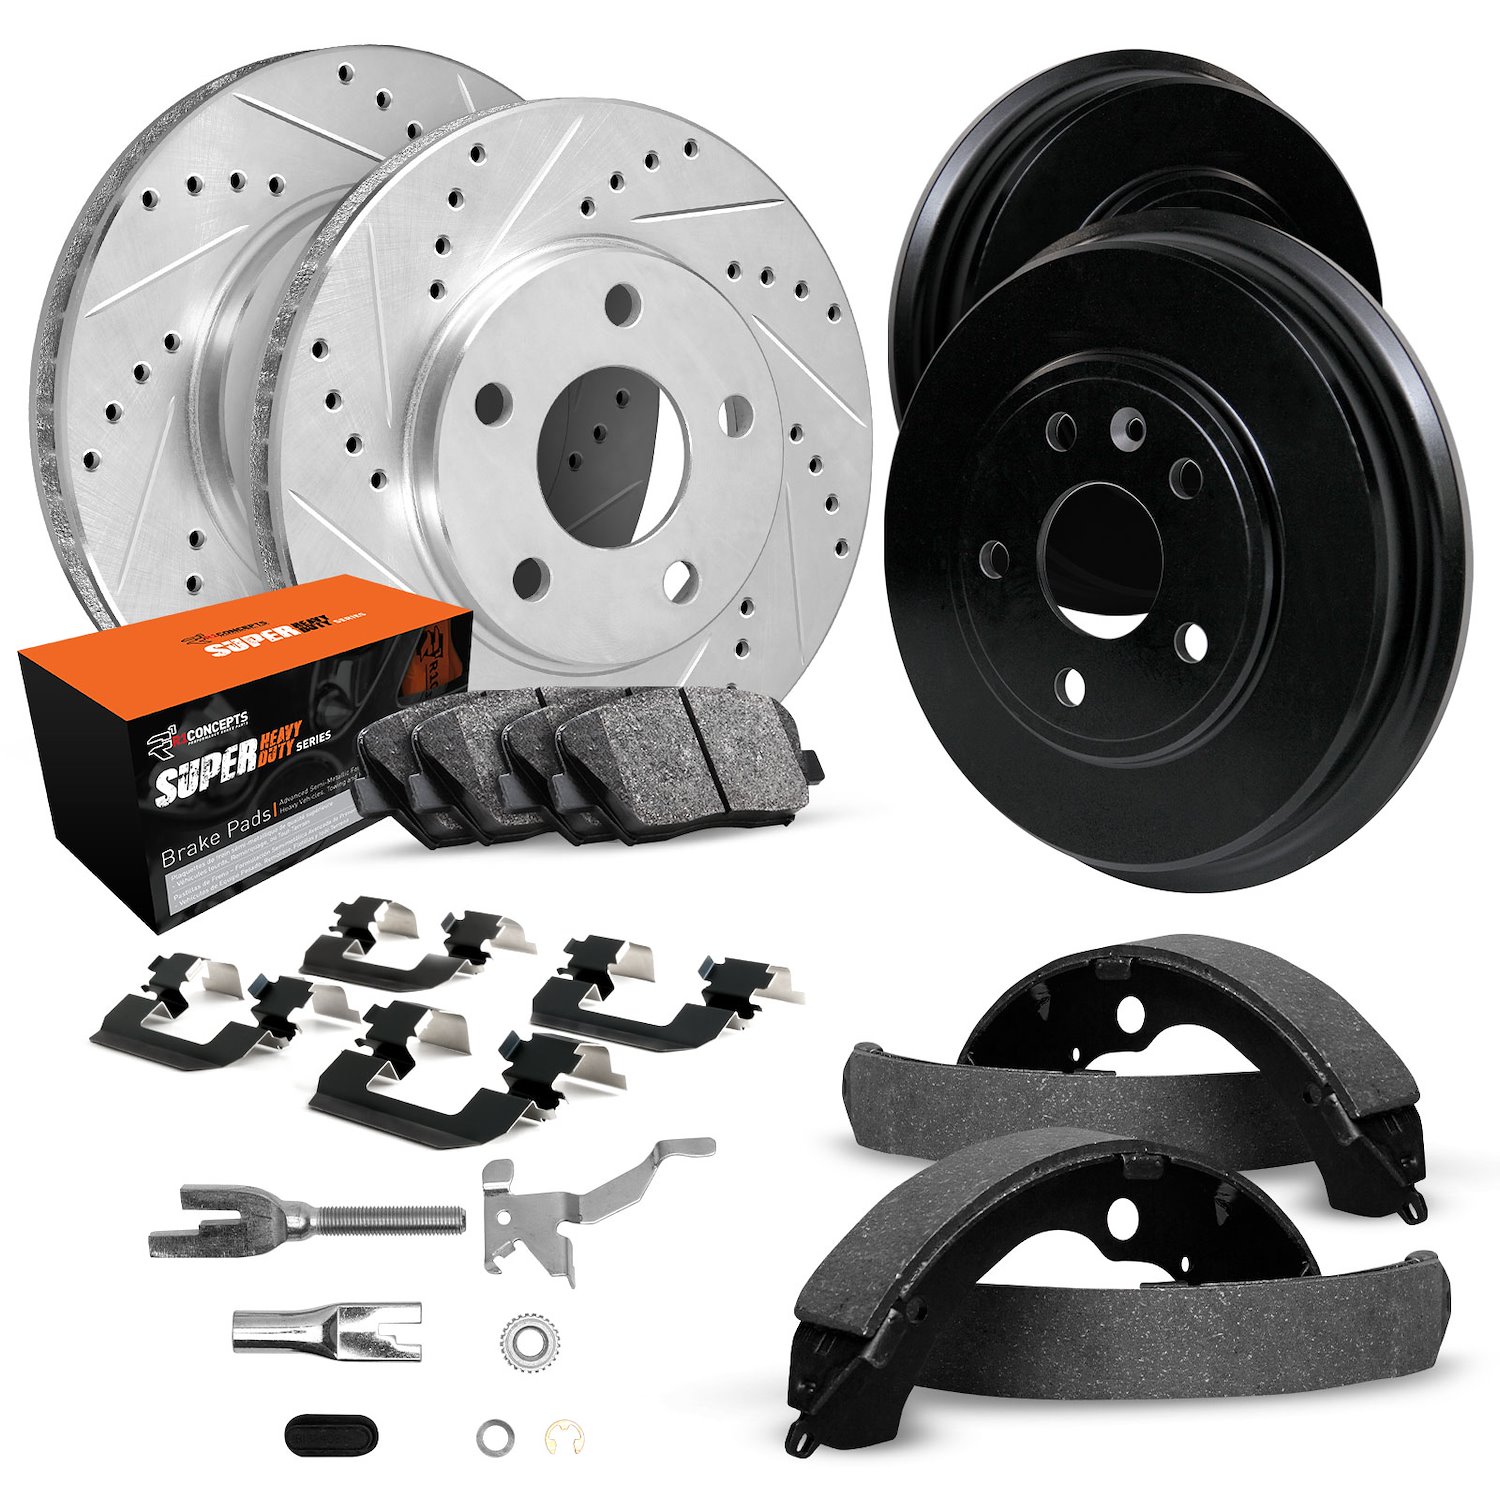 E-Line Drilled/Slotted Silver Rotor & Drum Set w/Super-Duty Pads, Shoes/Hardware/Adjusters, 1974-1975 Ford/Lincoln/Mercury/Mazda